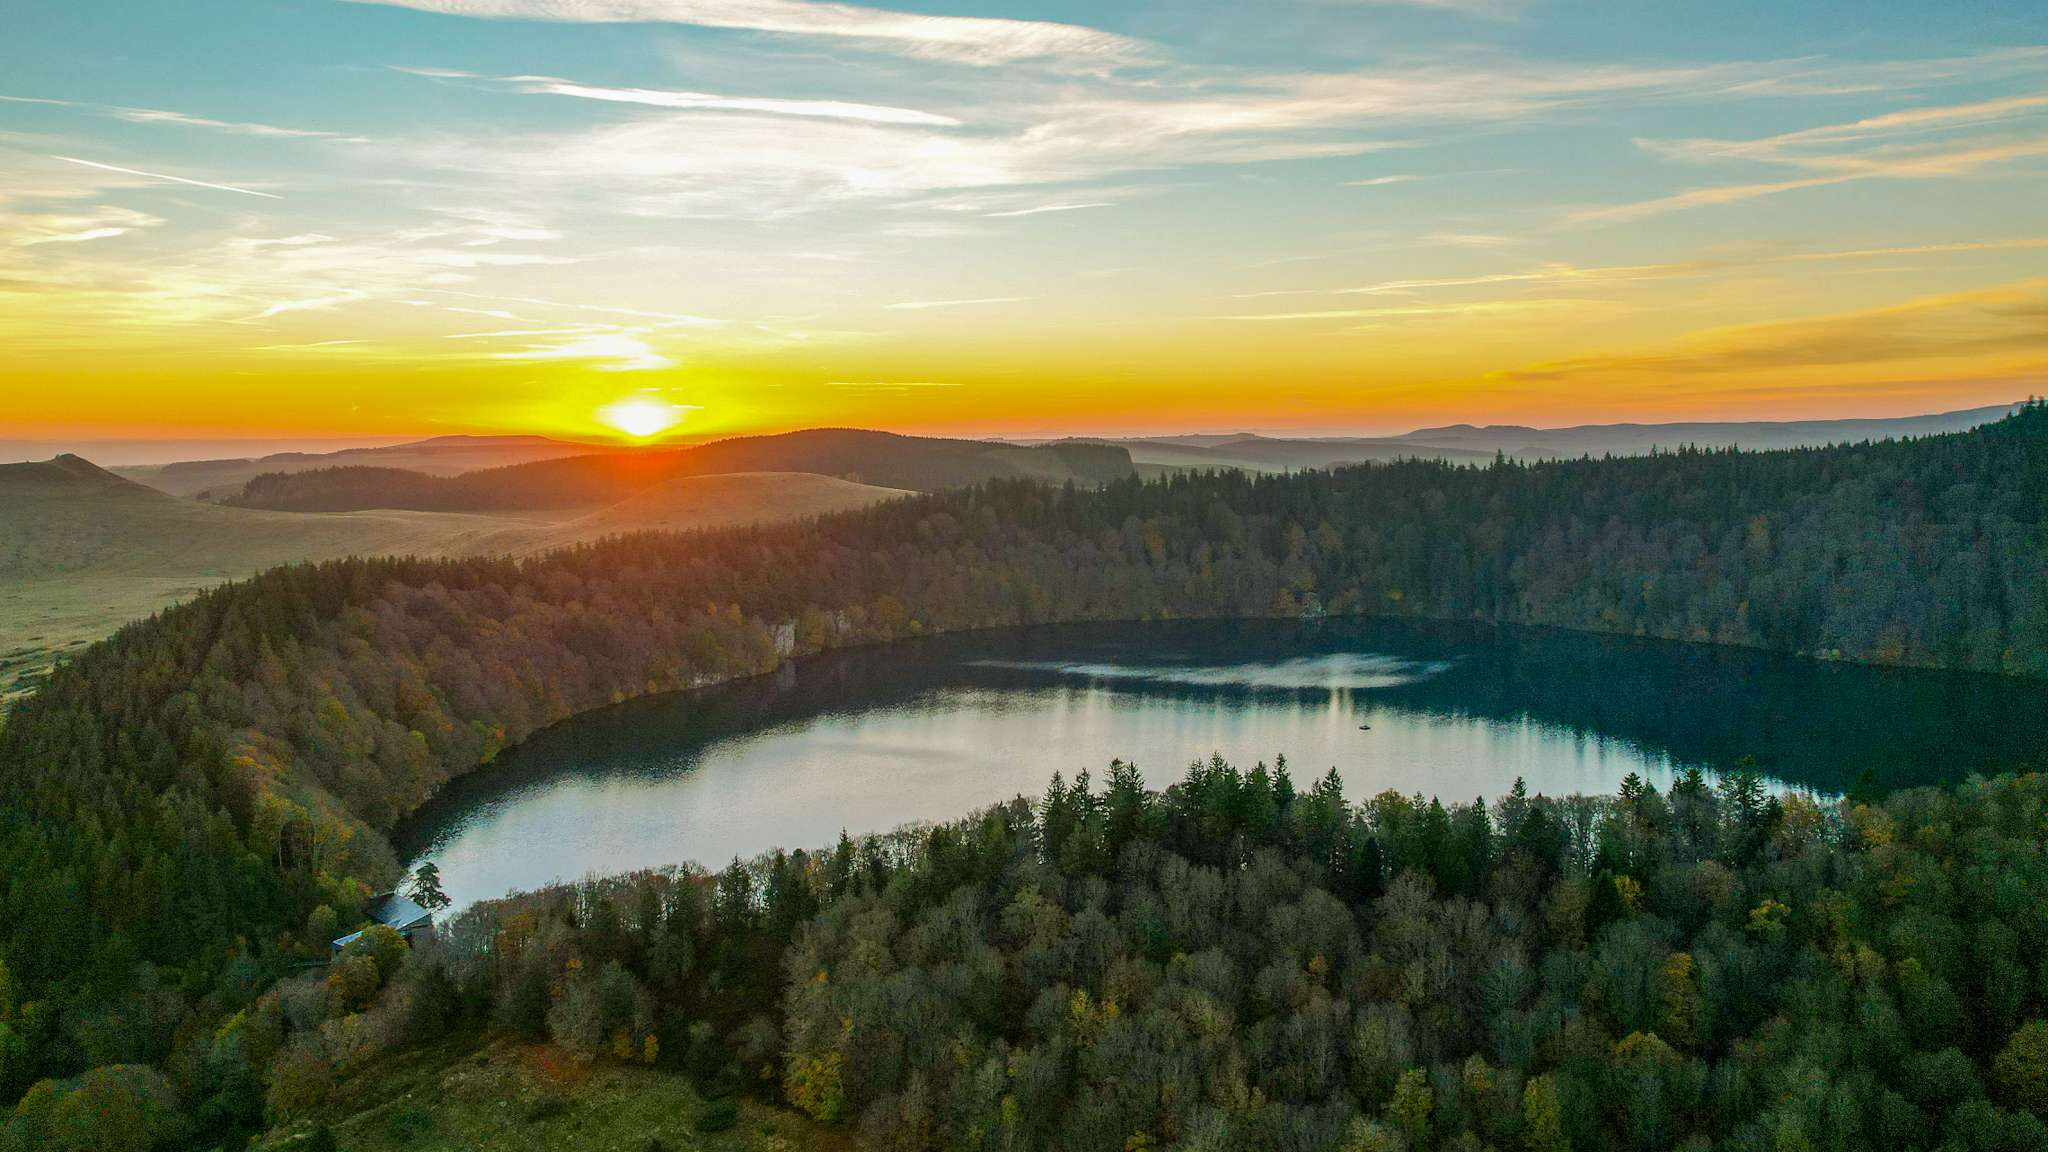 Sunrise in October on Lac Pavin